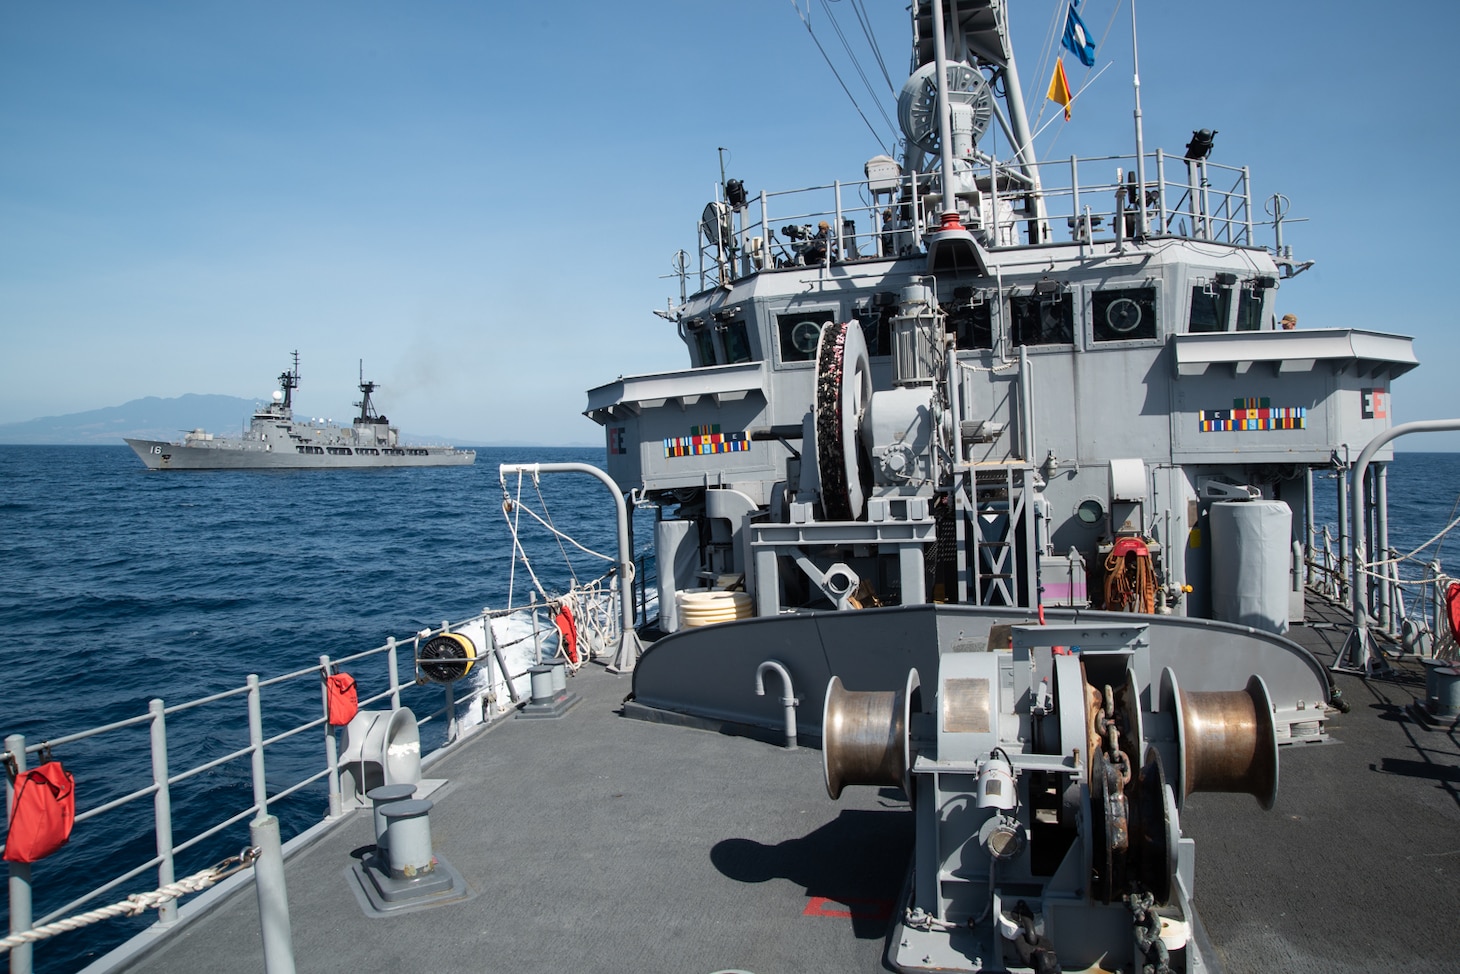 Chief, part of Mine Countermeasures Squadron 7, is operating in the Indo-Pacific region to enhance interoperability with partners and serve as a ready-response platform for contingency operations.